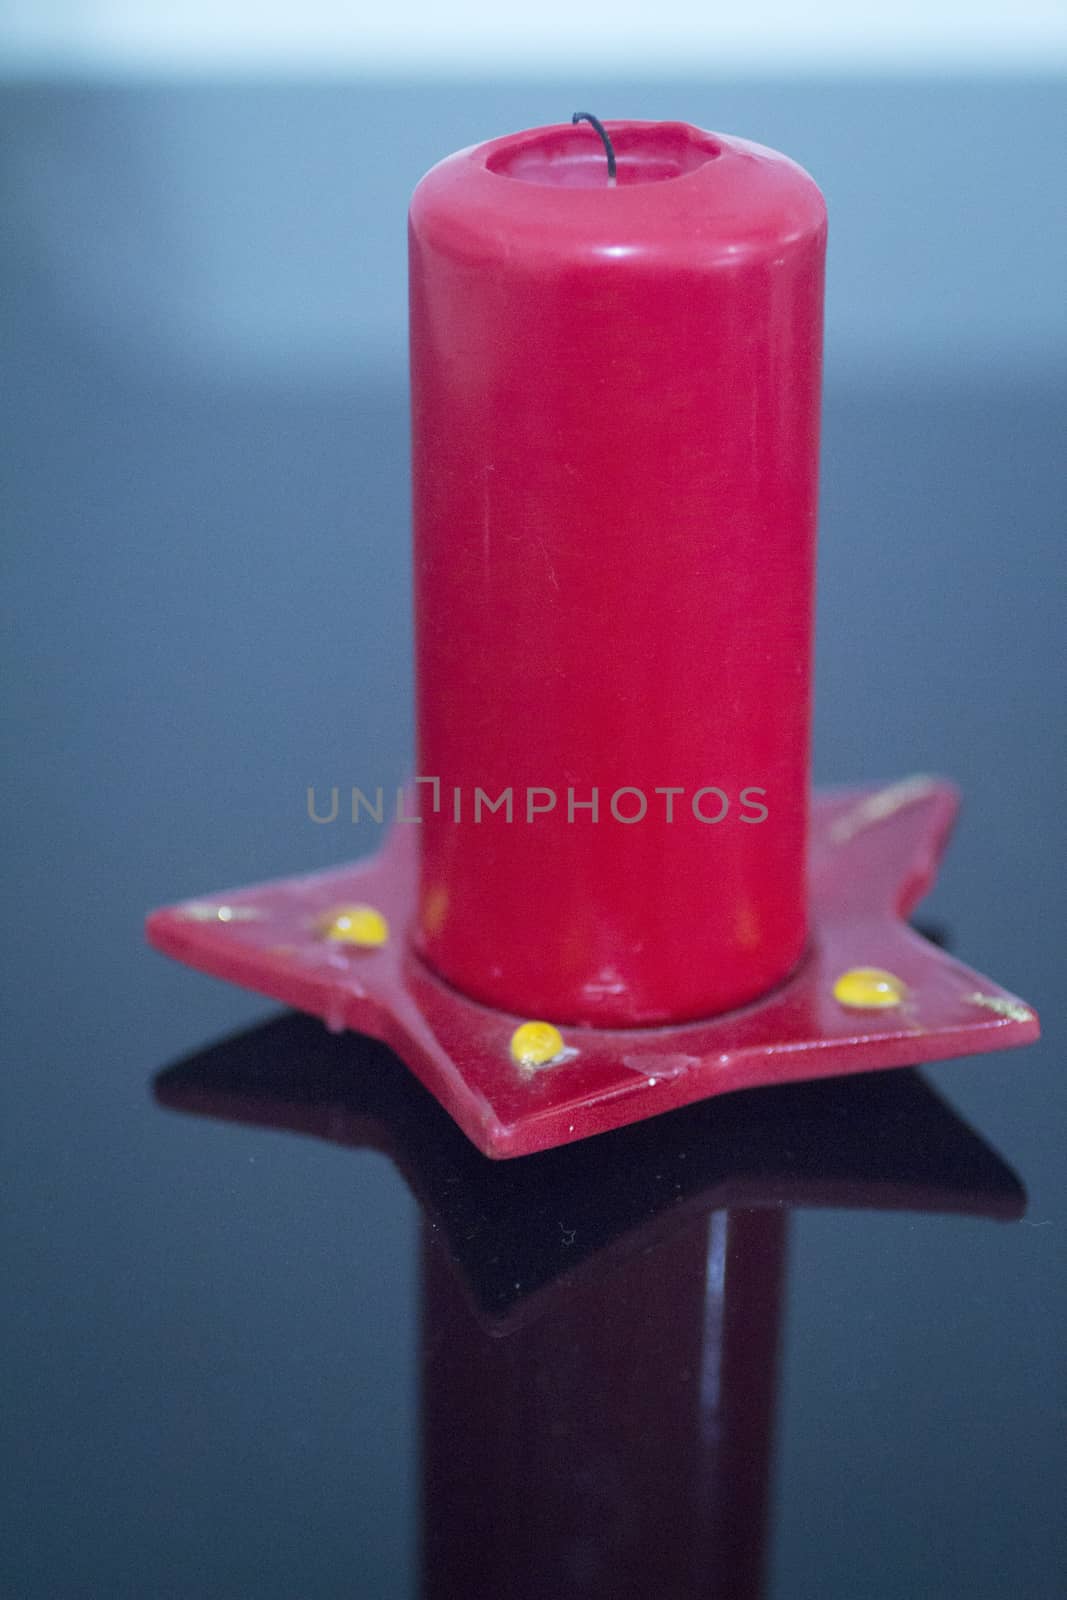 One large red Candle on red decorative Christmas star dish on plain studio blue background. 